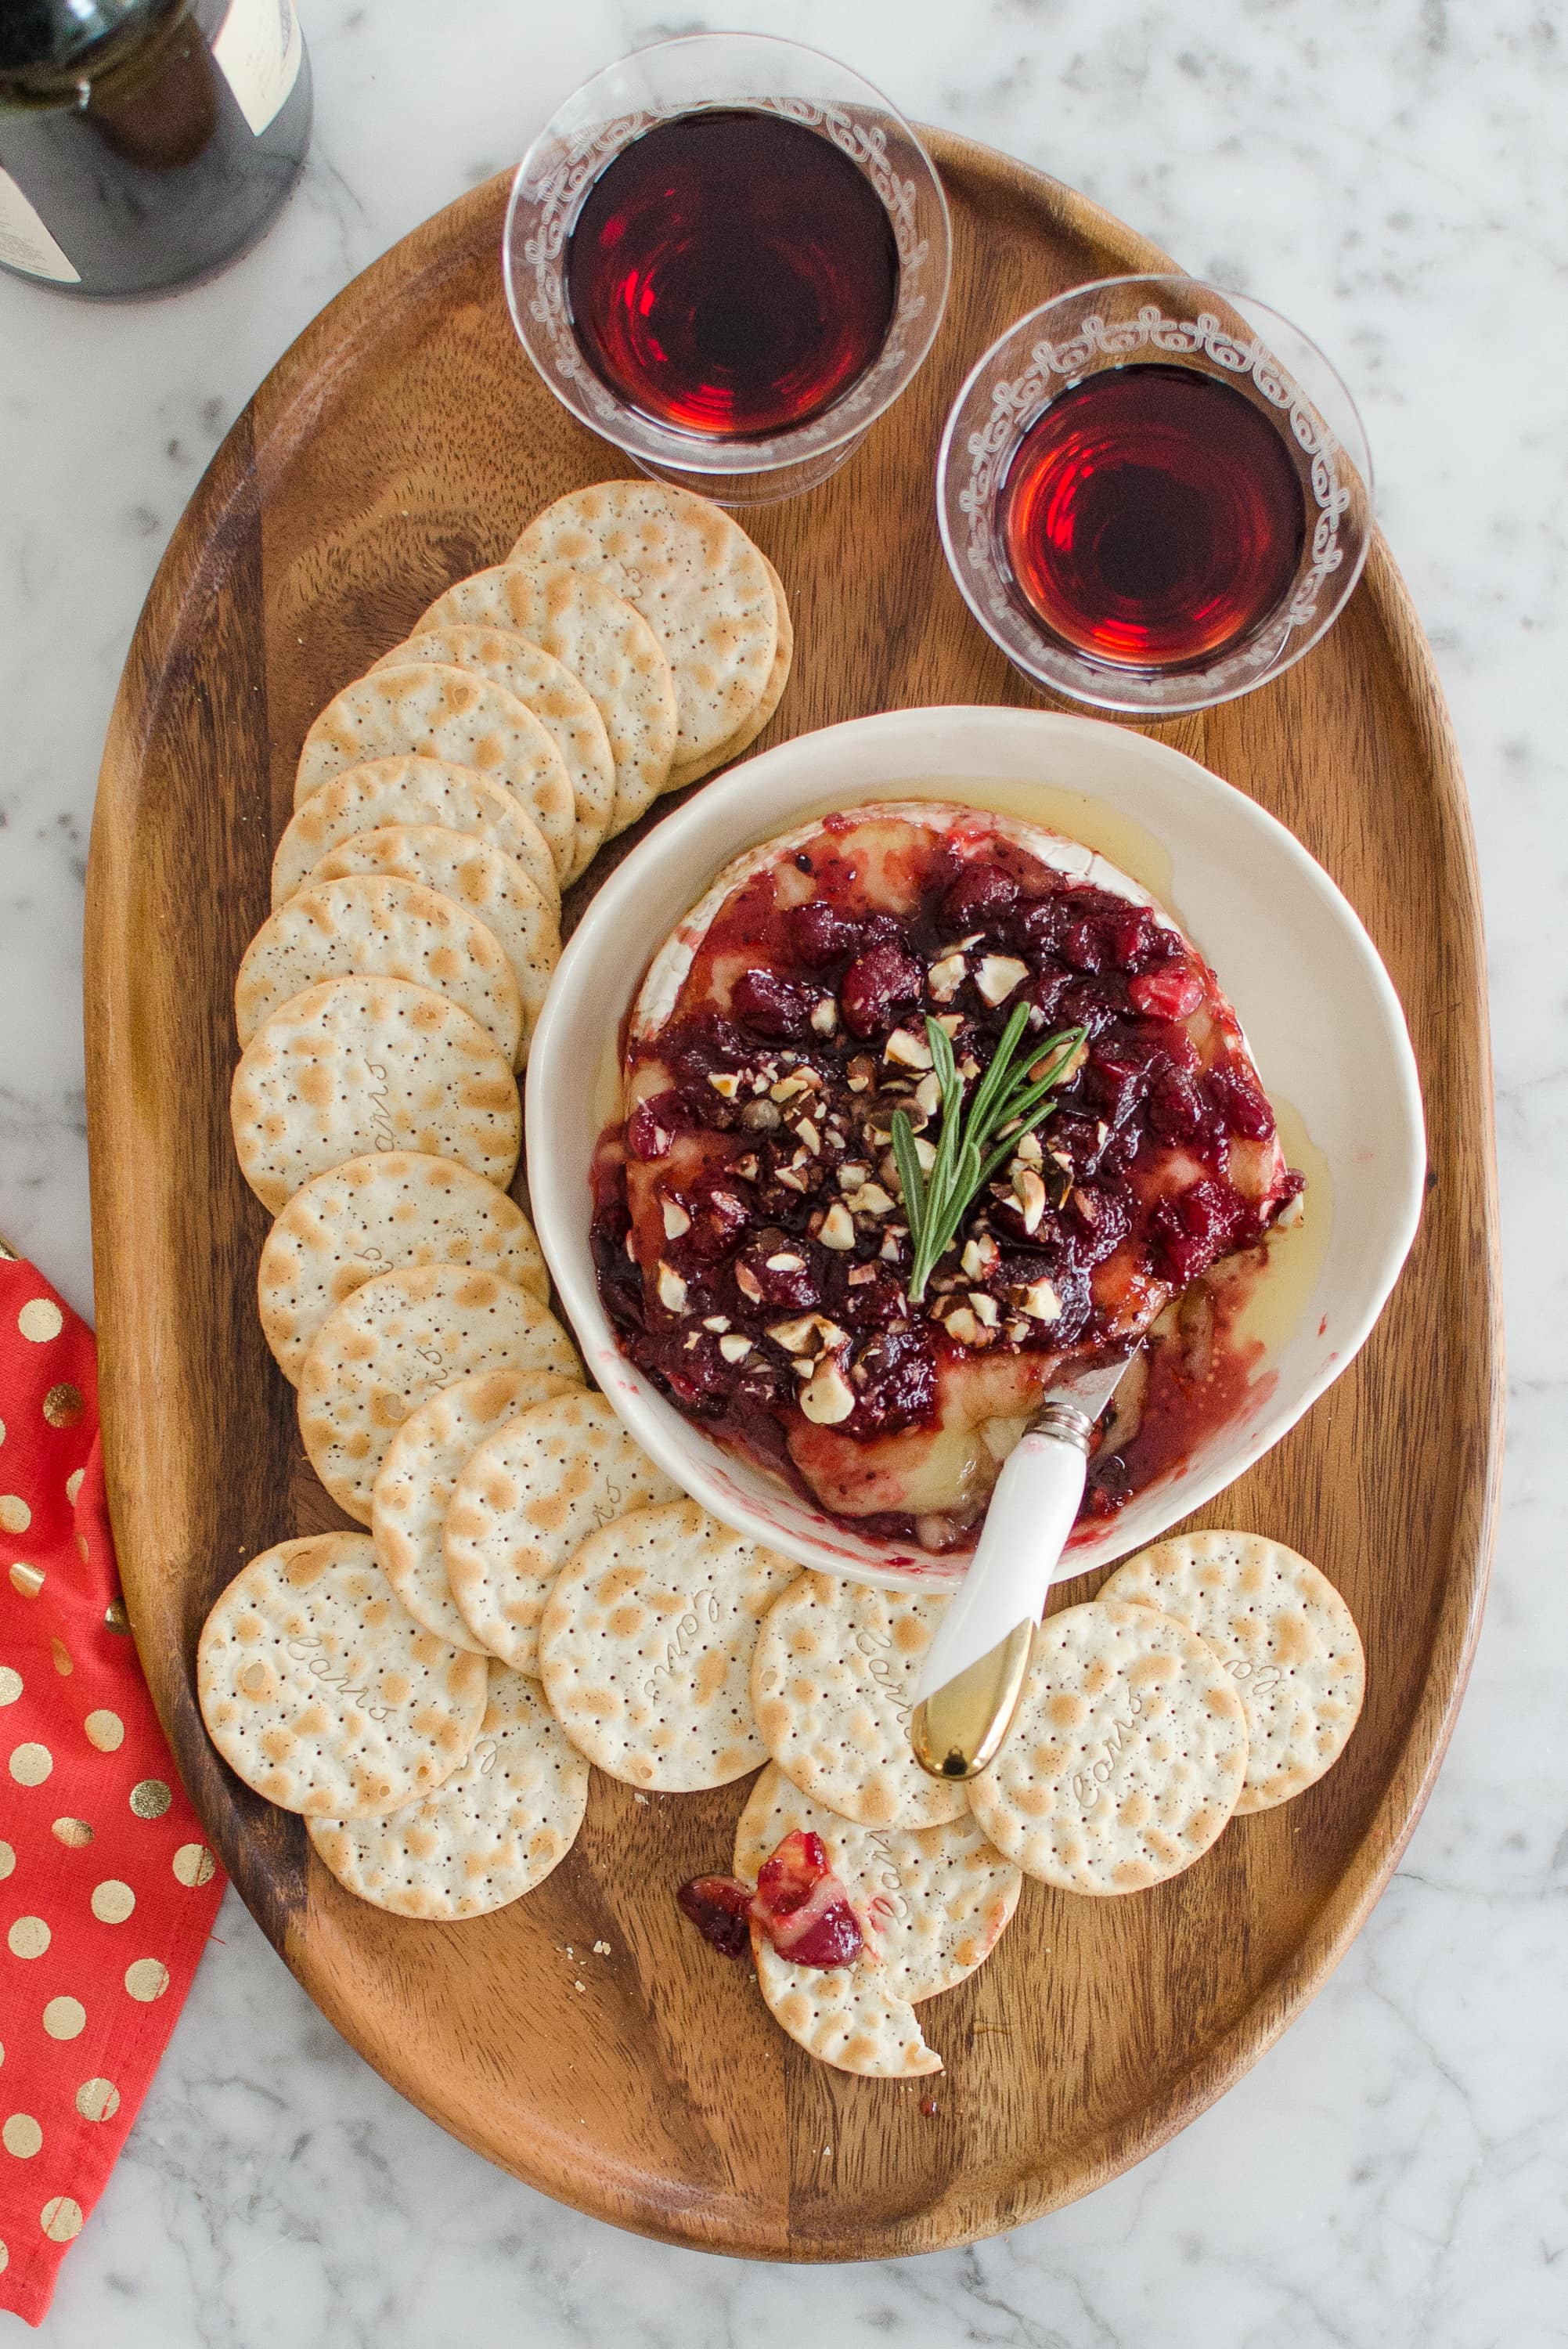 Holiday Appetizer Recipe: Baked Brie with Cranberry Sauce | Kitchn